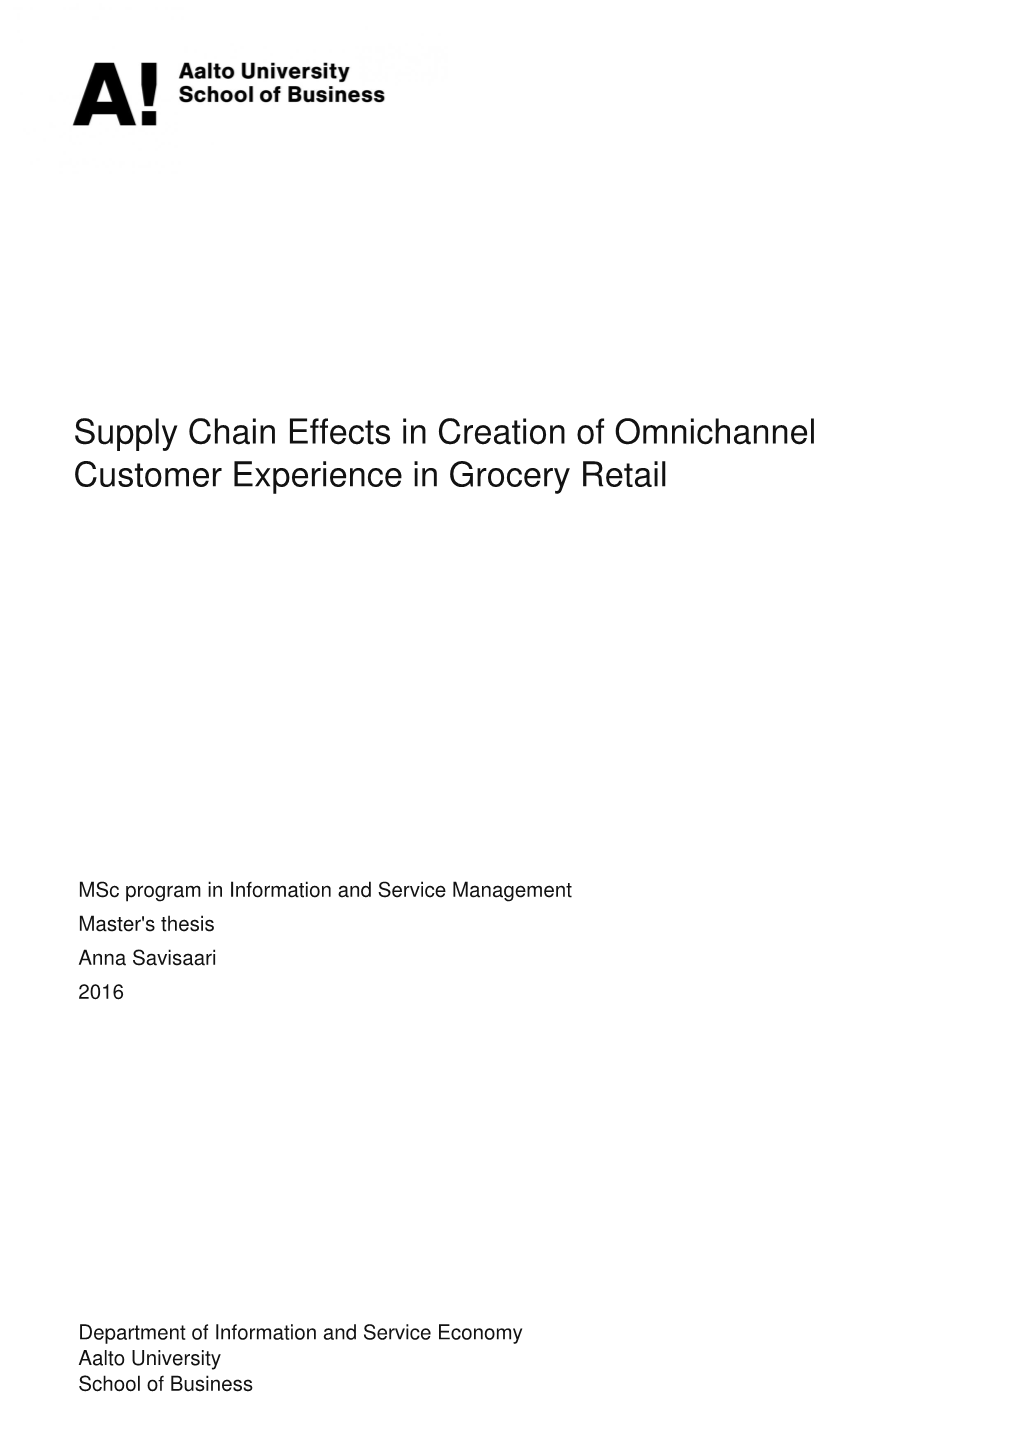 Supply Chain Effects in Creation of Omnichannel Customer Experience in Grocery Retail